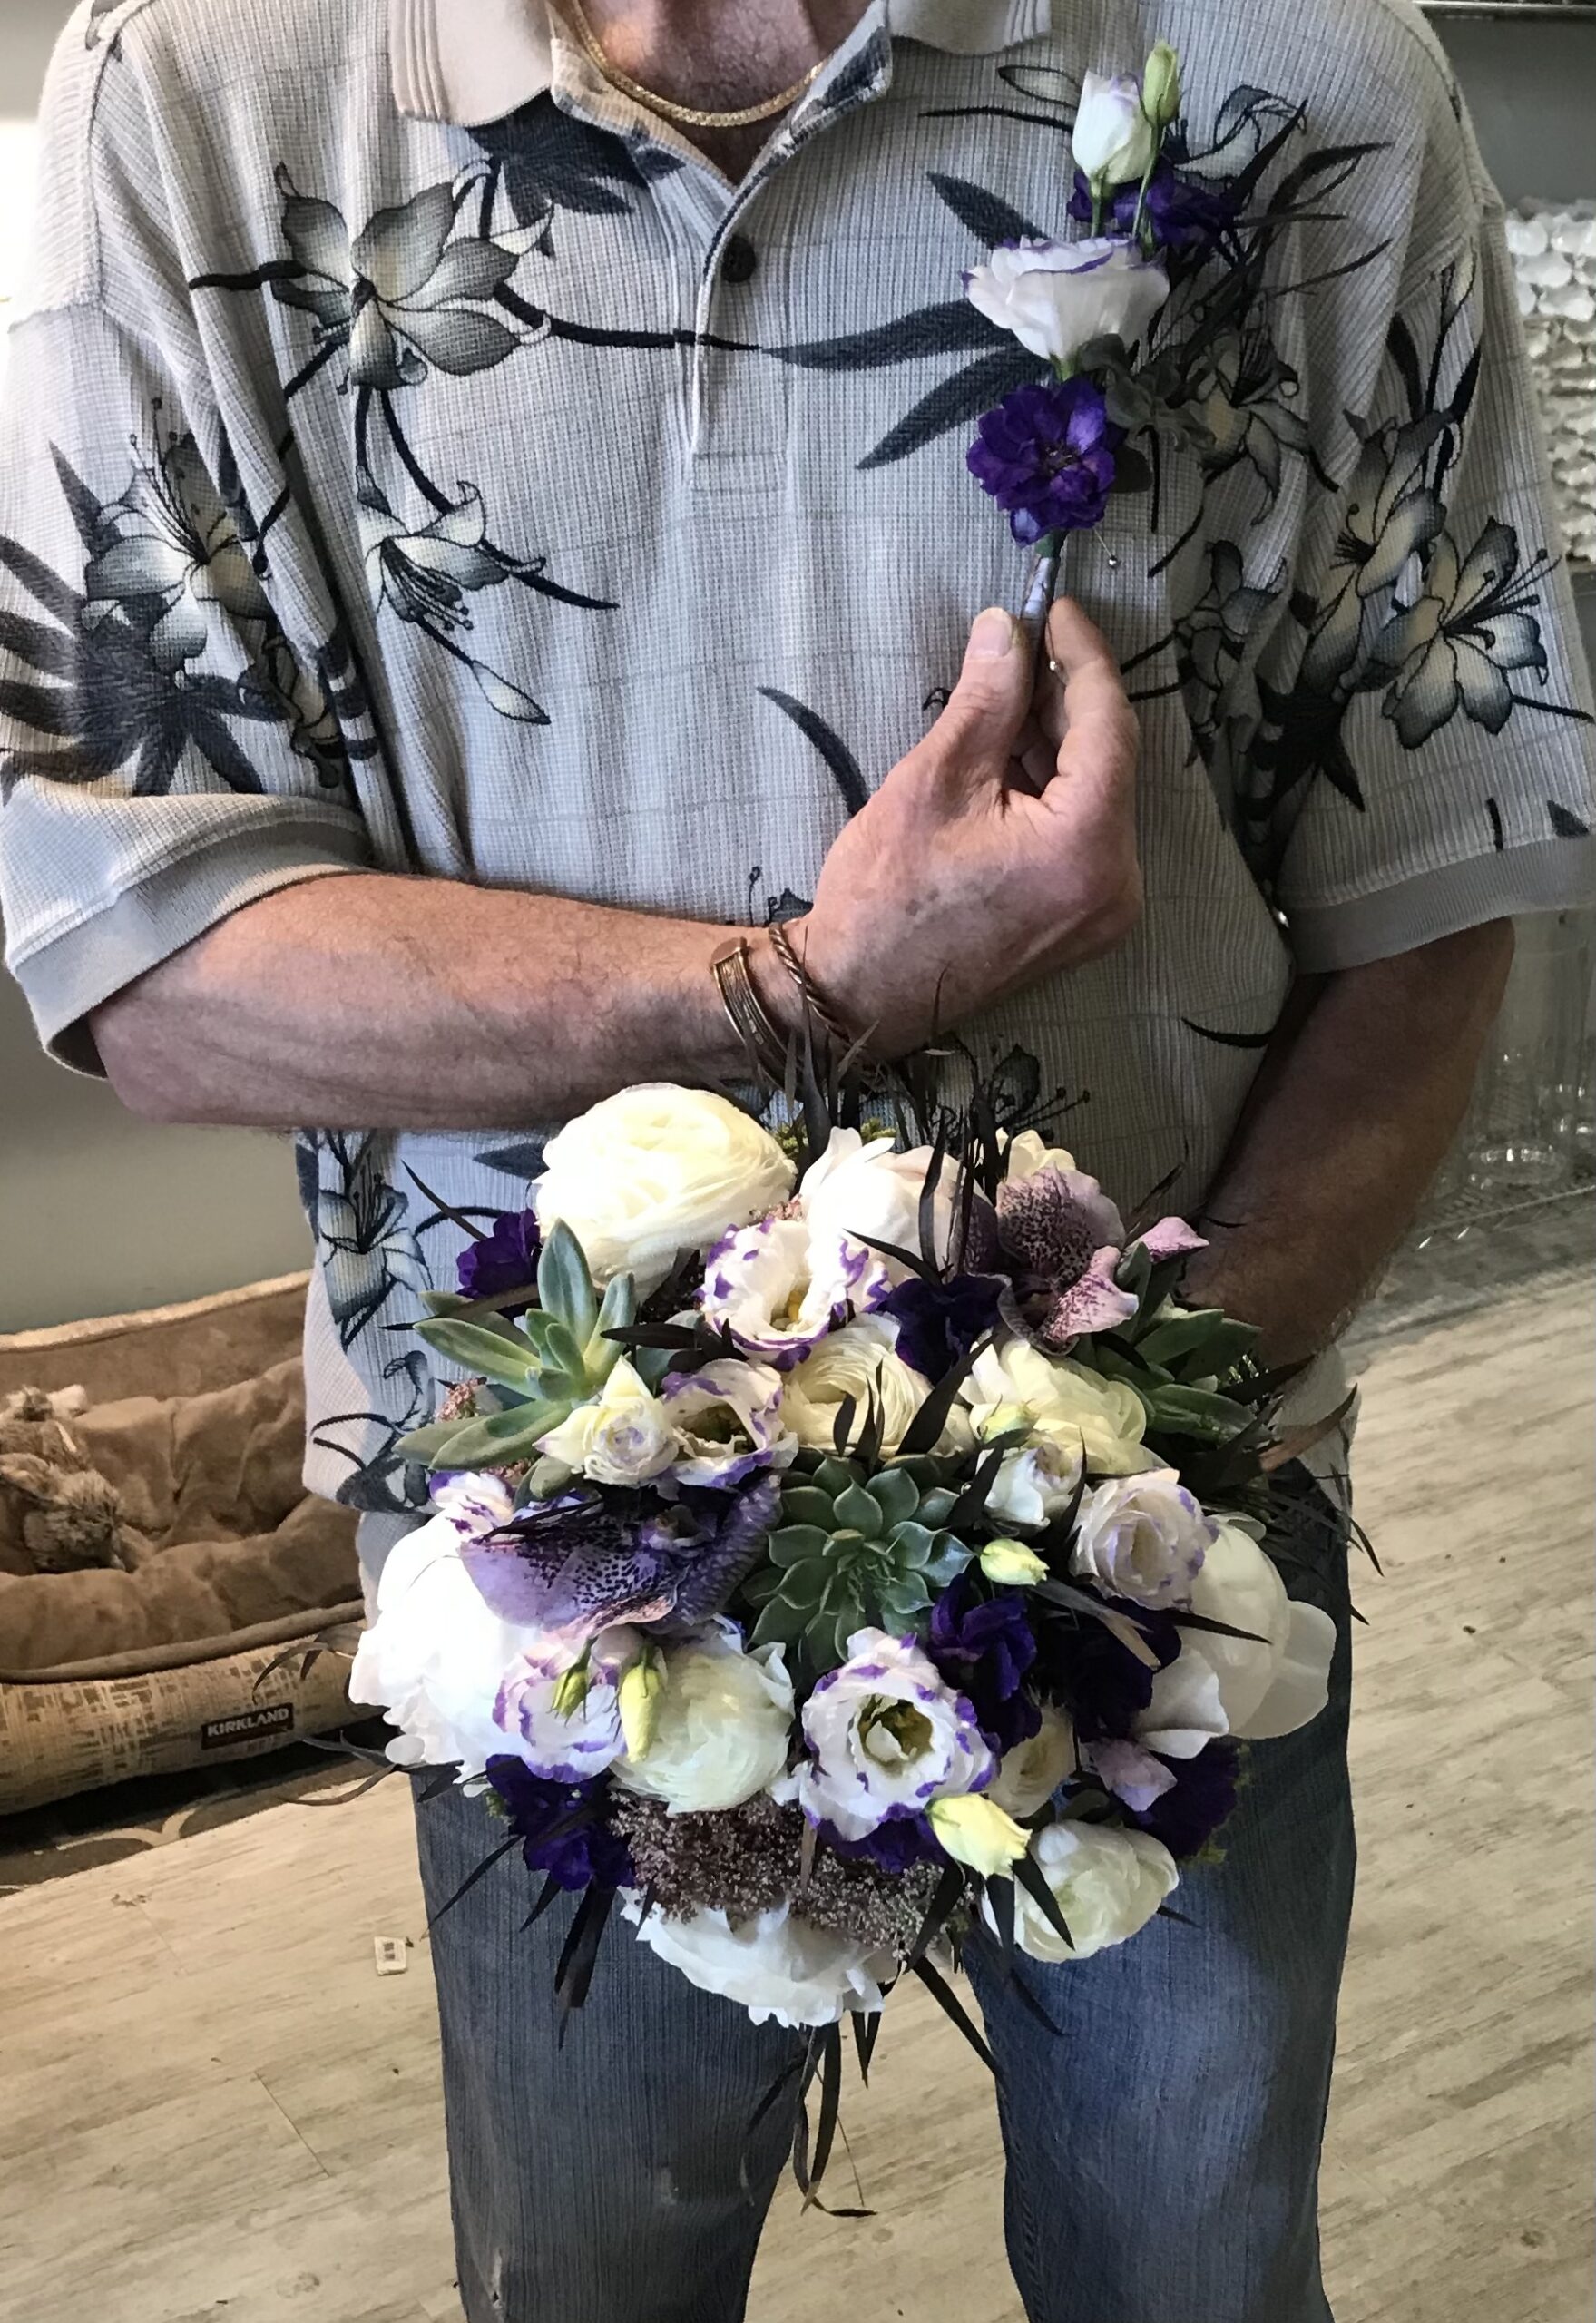 A man holding a bouquet of flowers in his hand.